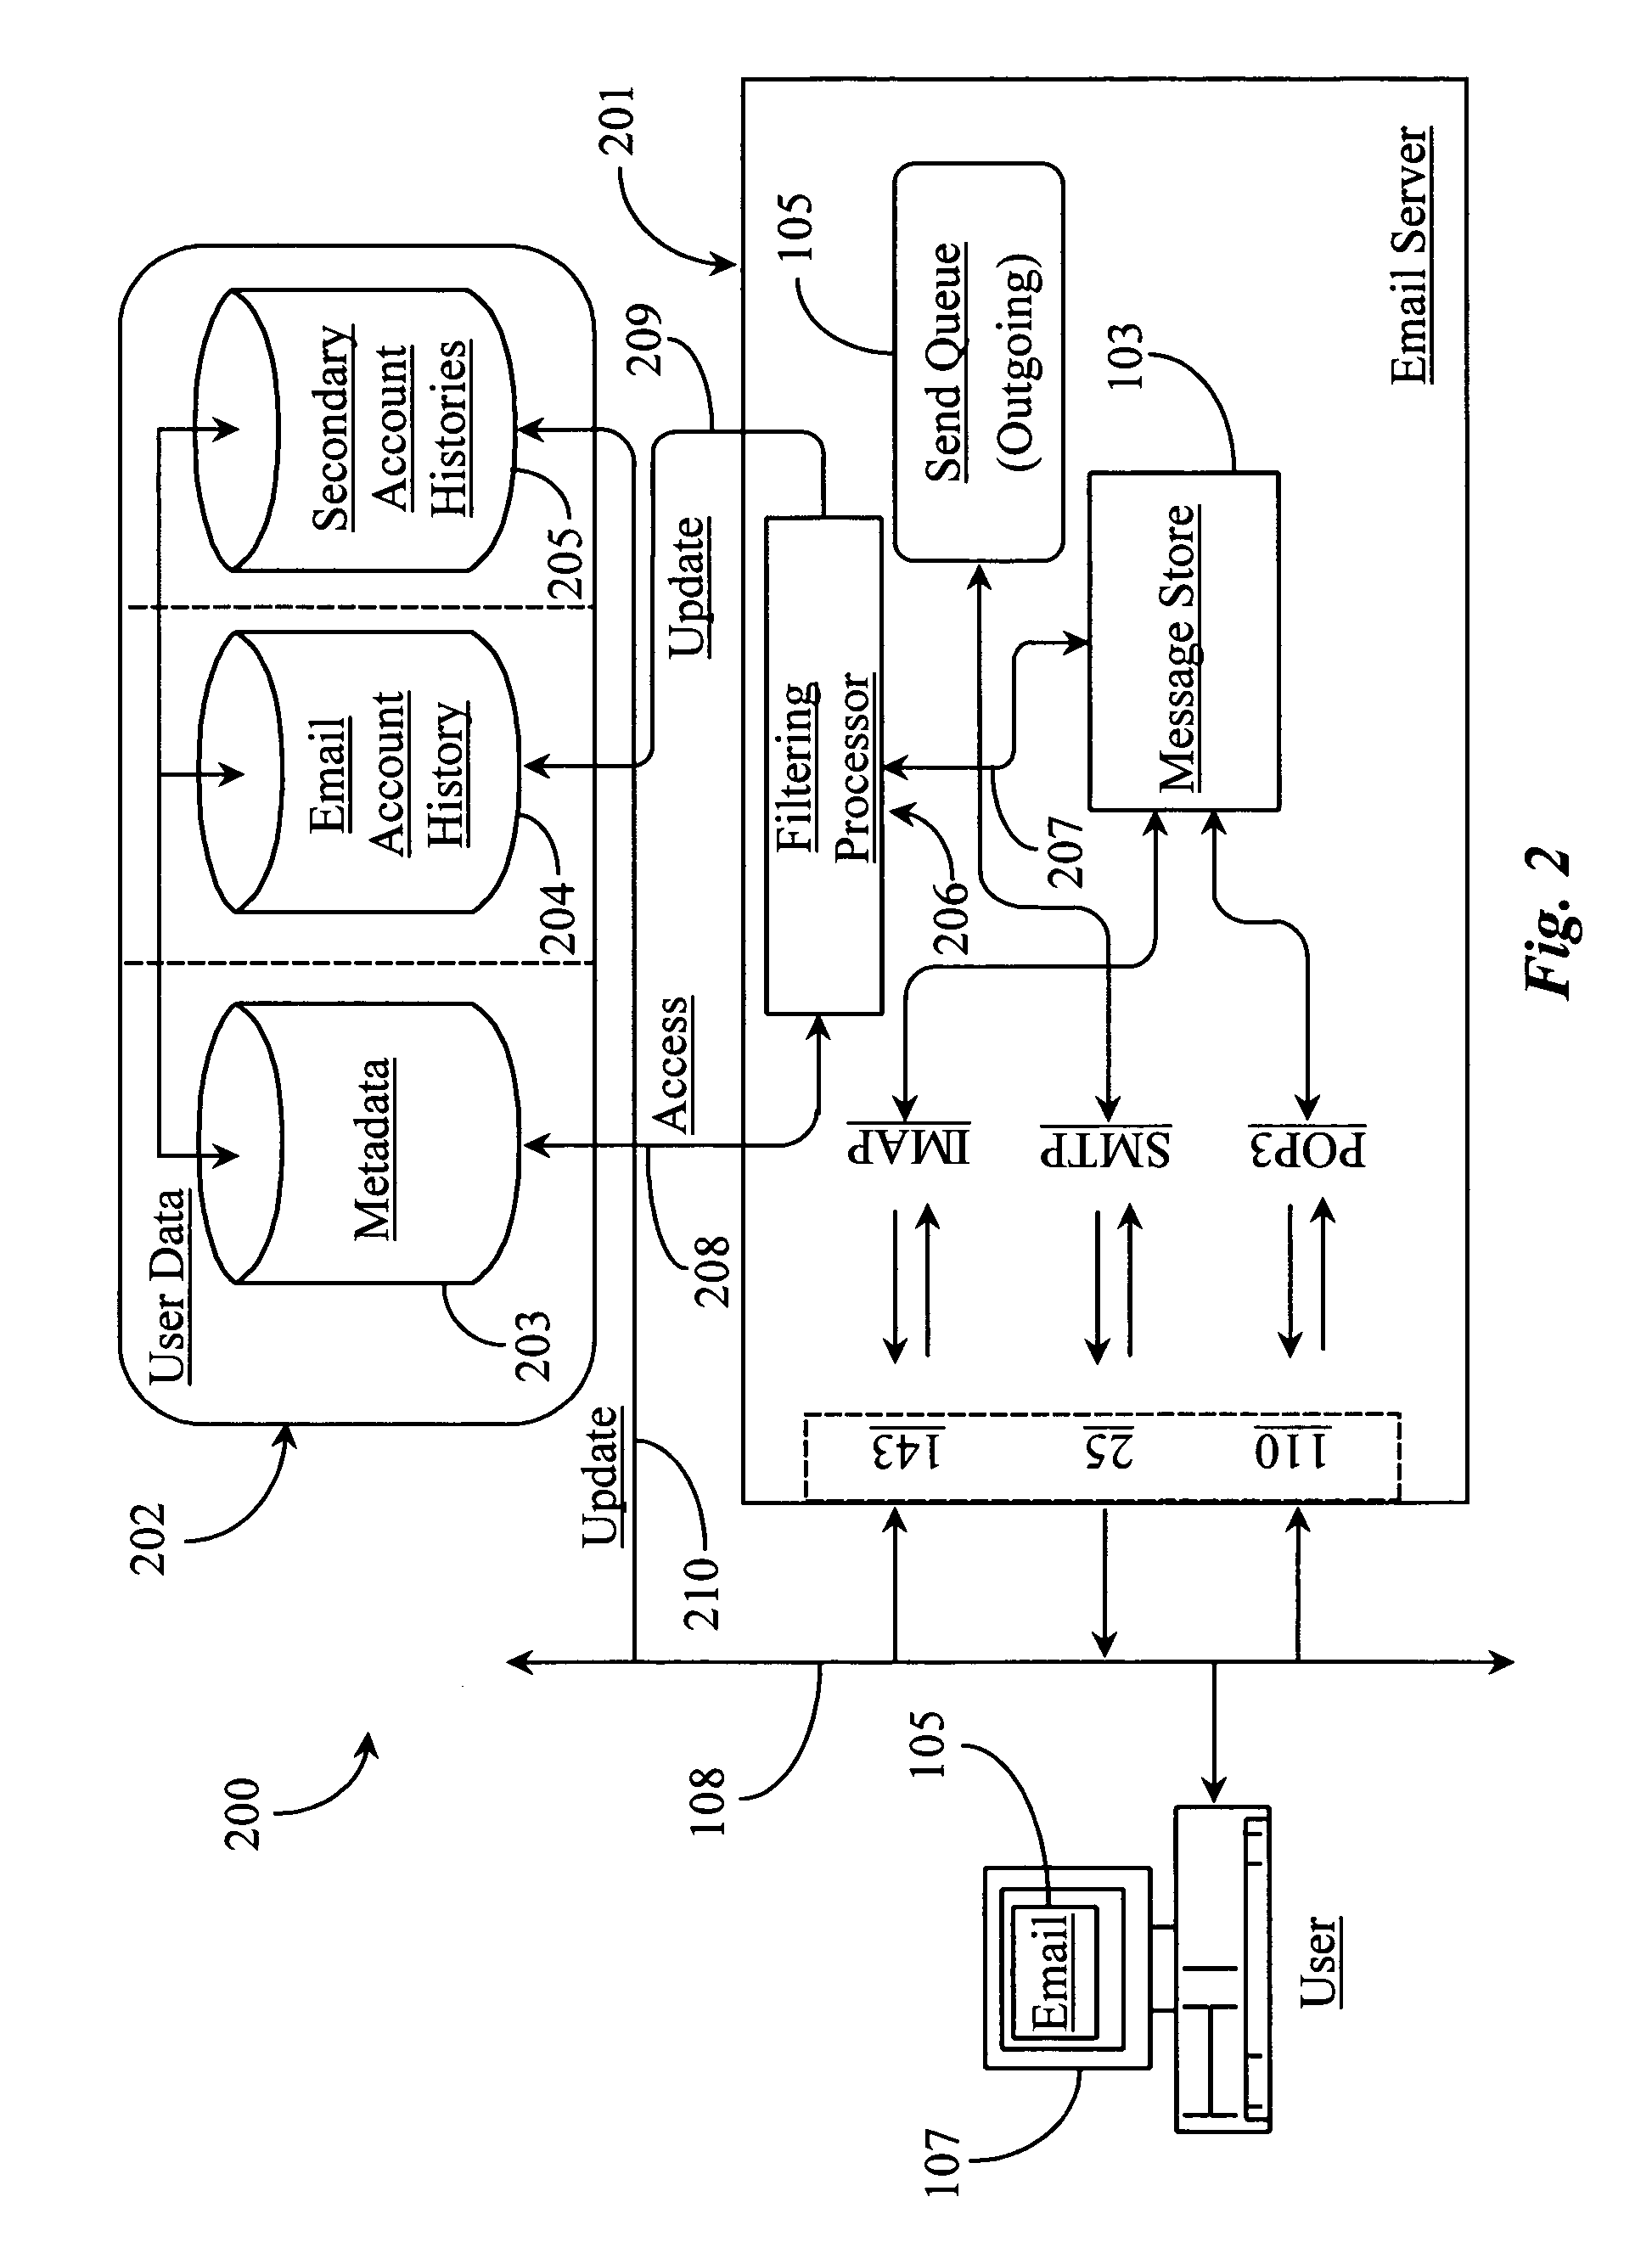 System for reclassification of electronic messages in a spam filtering system